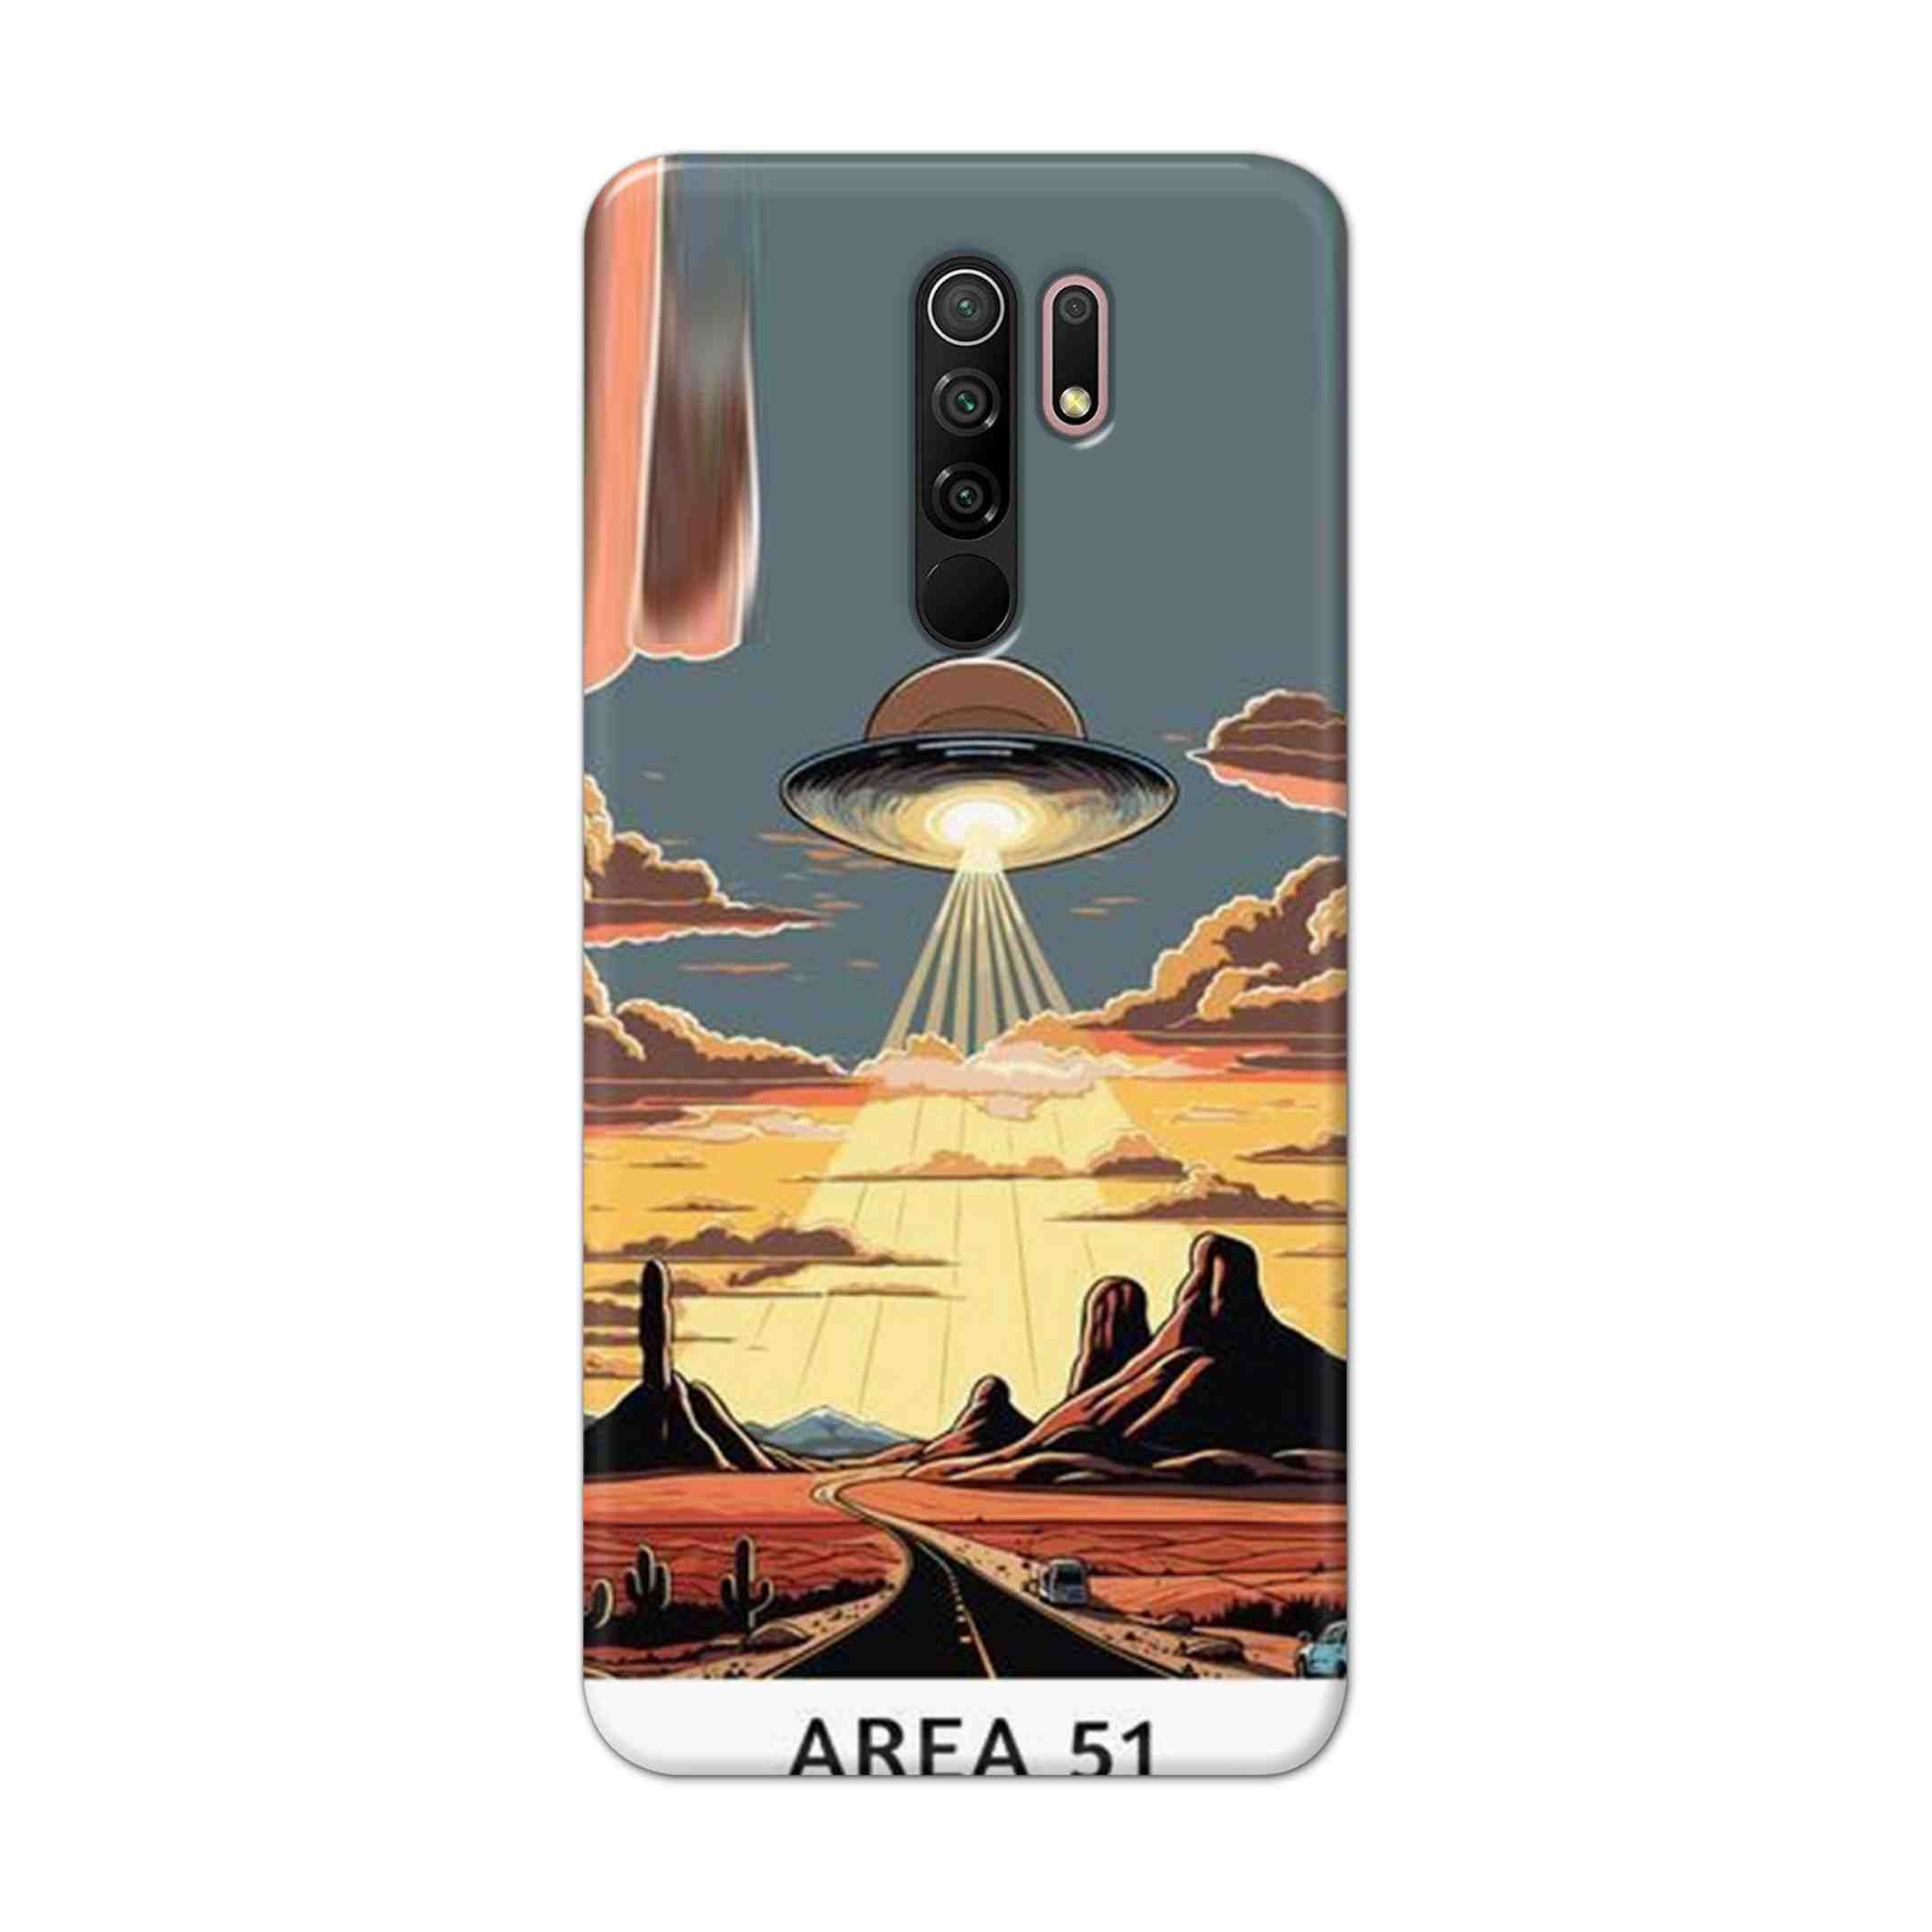 Buy Area 51 Hard Back Mobile Phone Case Cover For Xiaomi Redmi 9 Prime Online